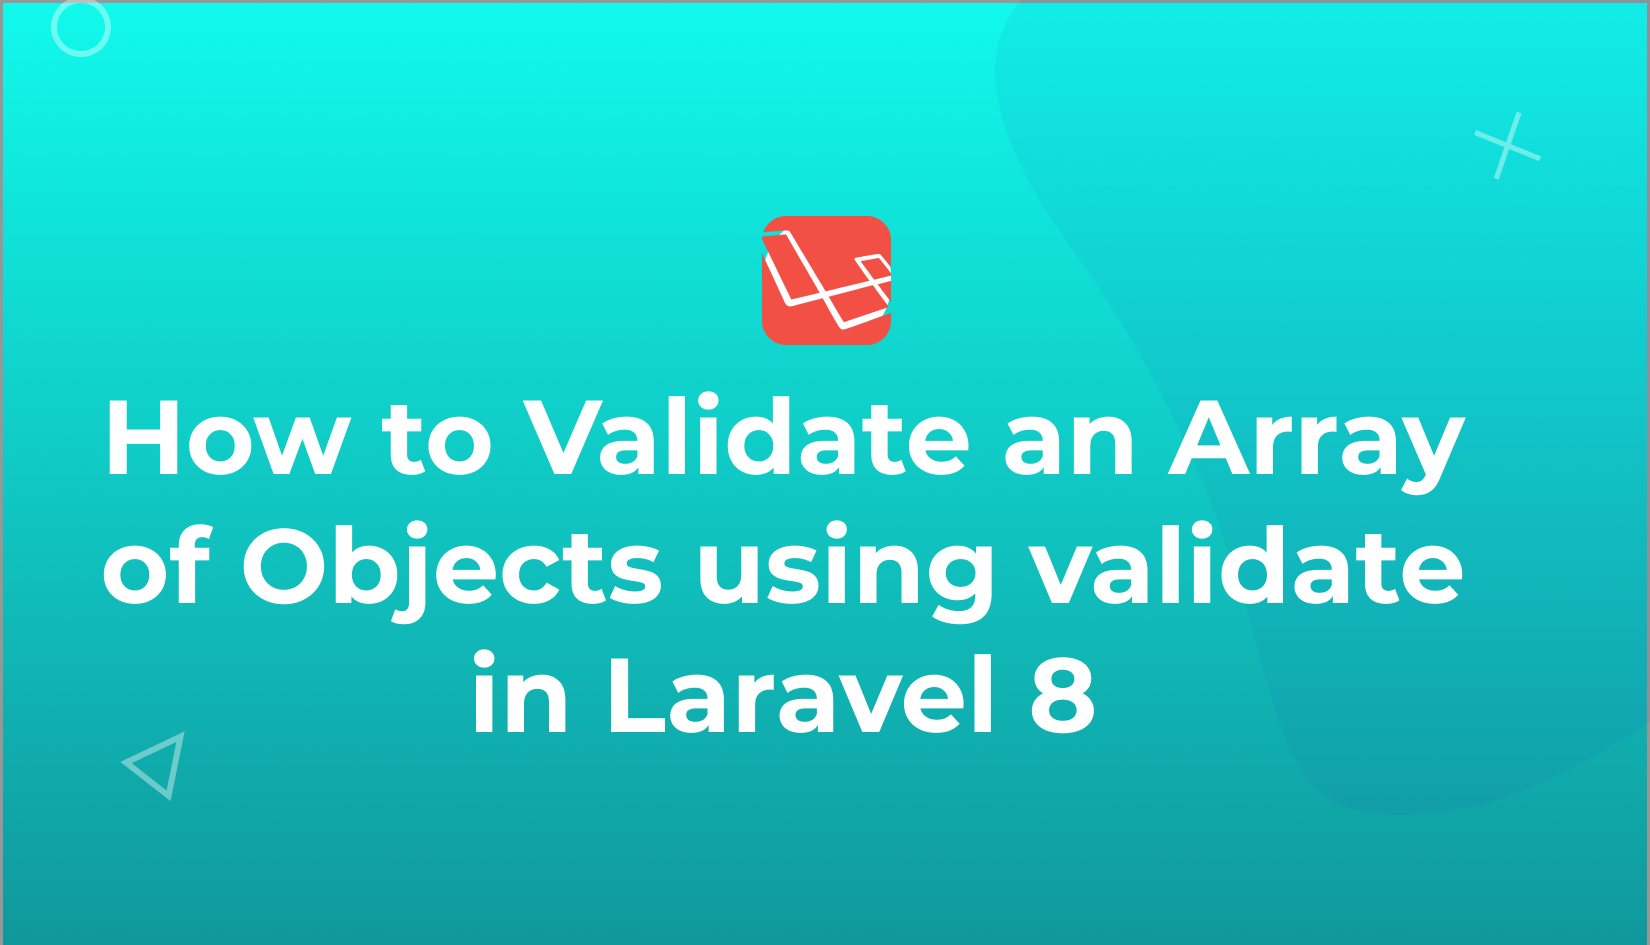 How to Validate an Array of Objects using validate in Laravel 8